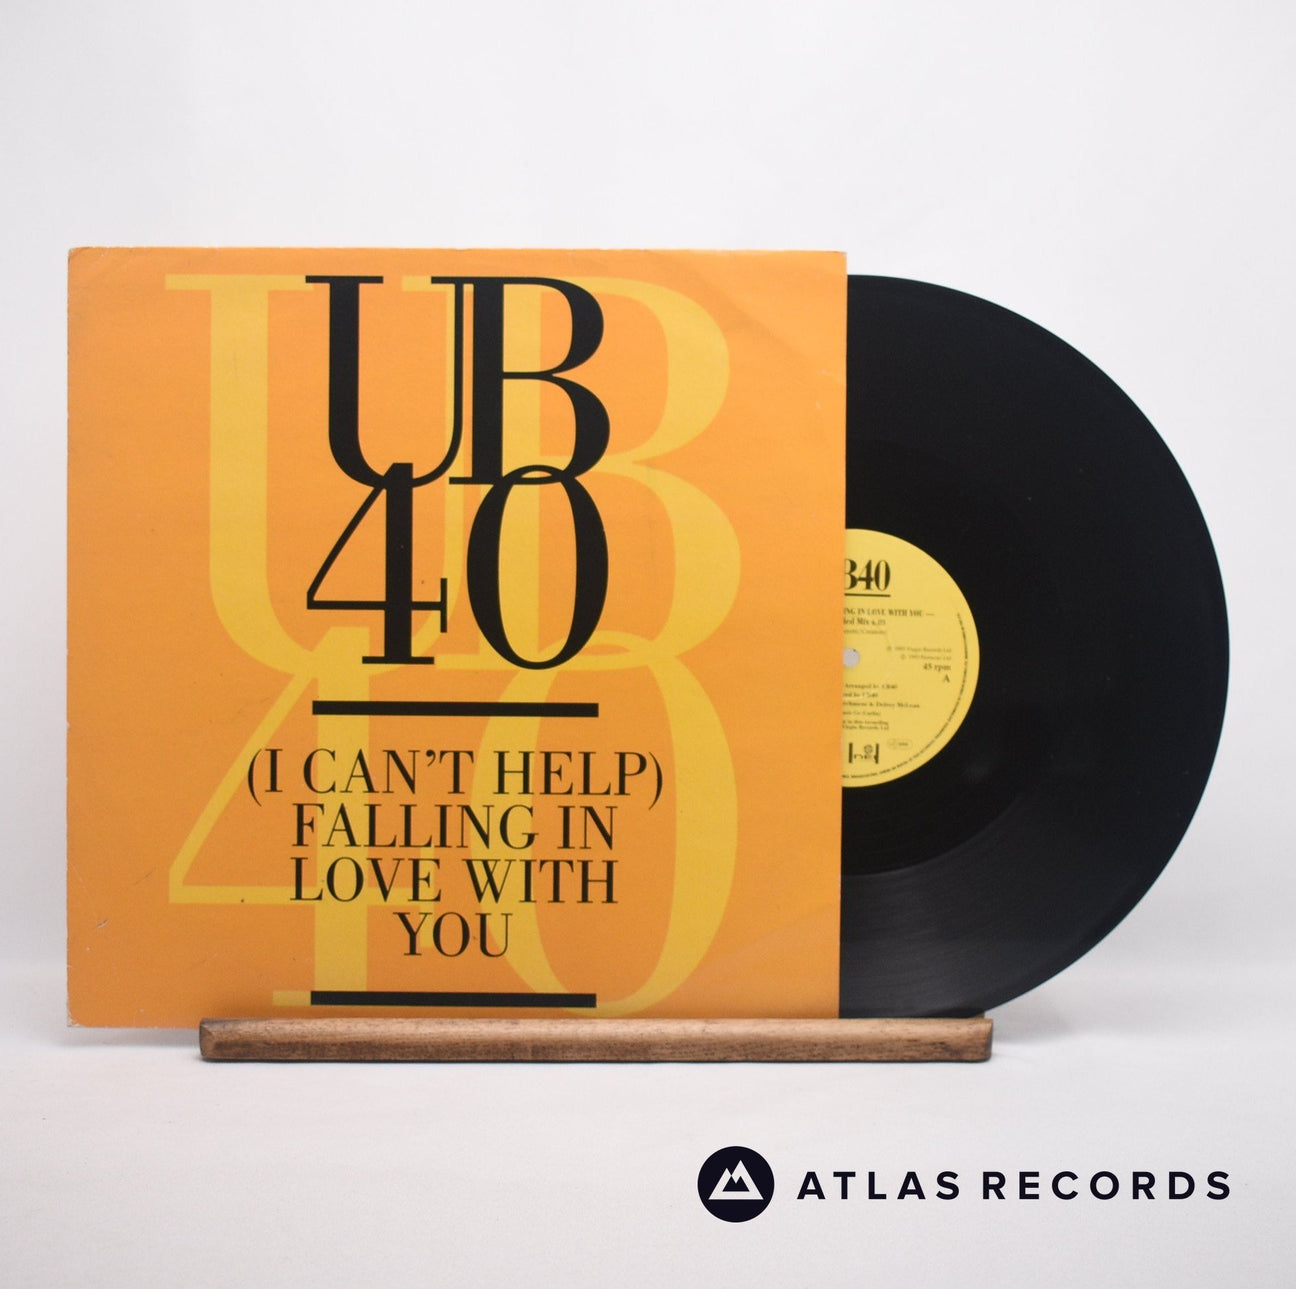 UB40 (I Can't Help) Falling In Love With You 12" Vinyl Record - Front Cover & Record